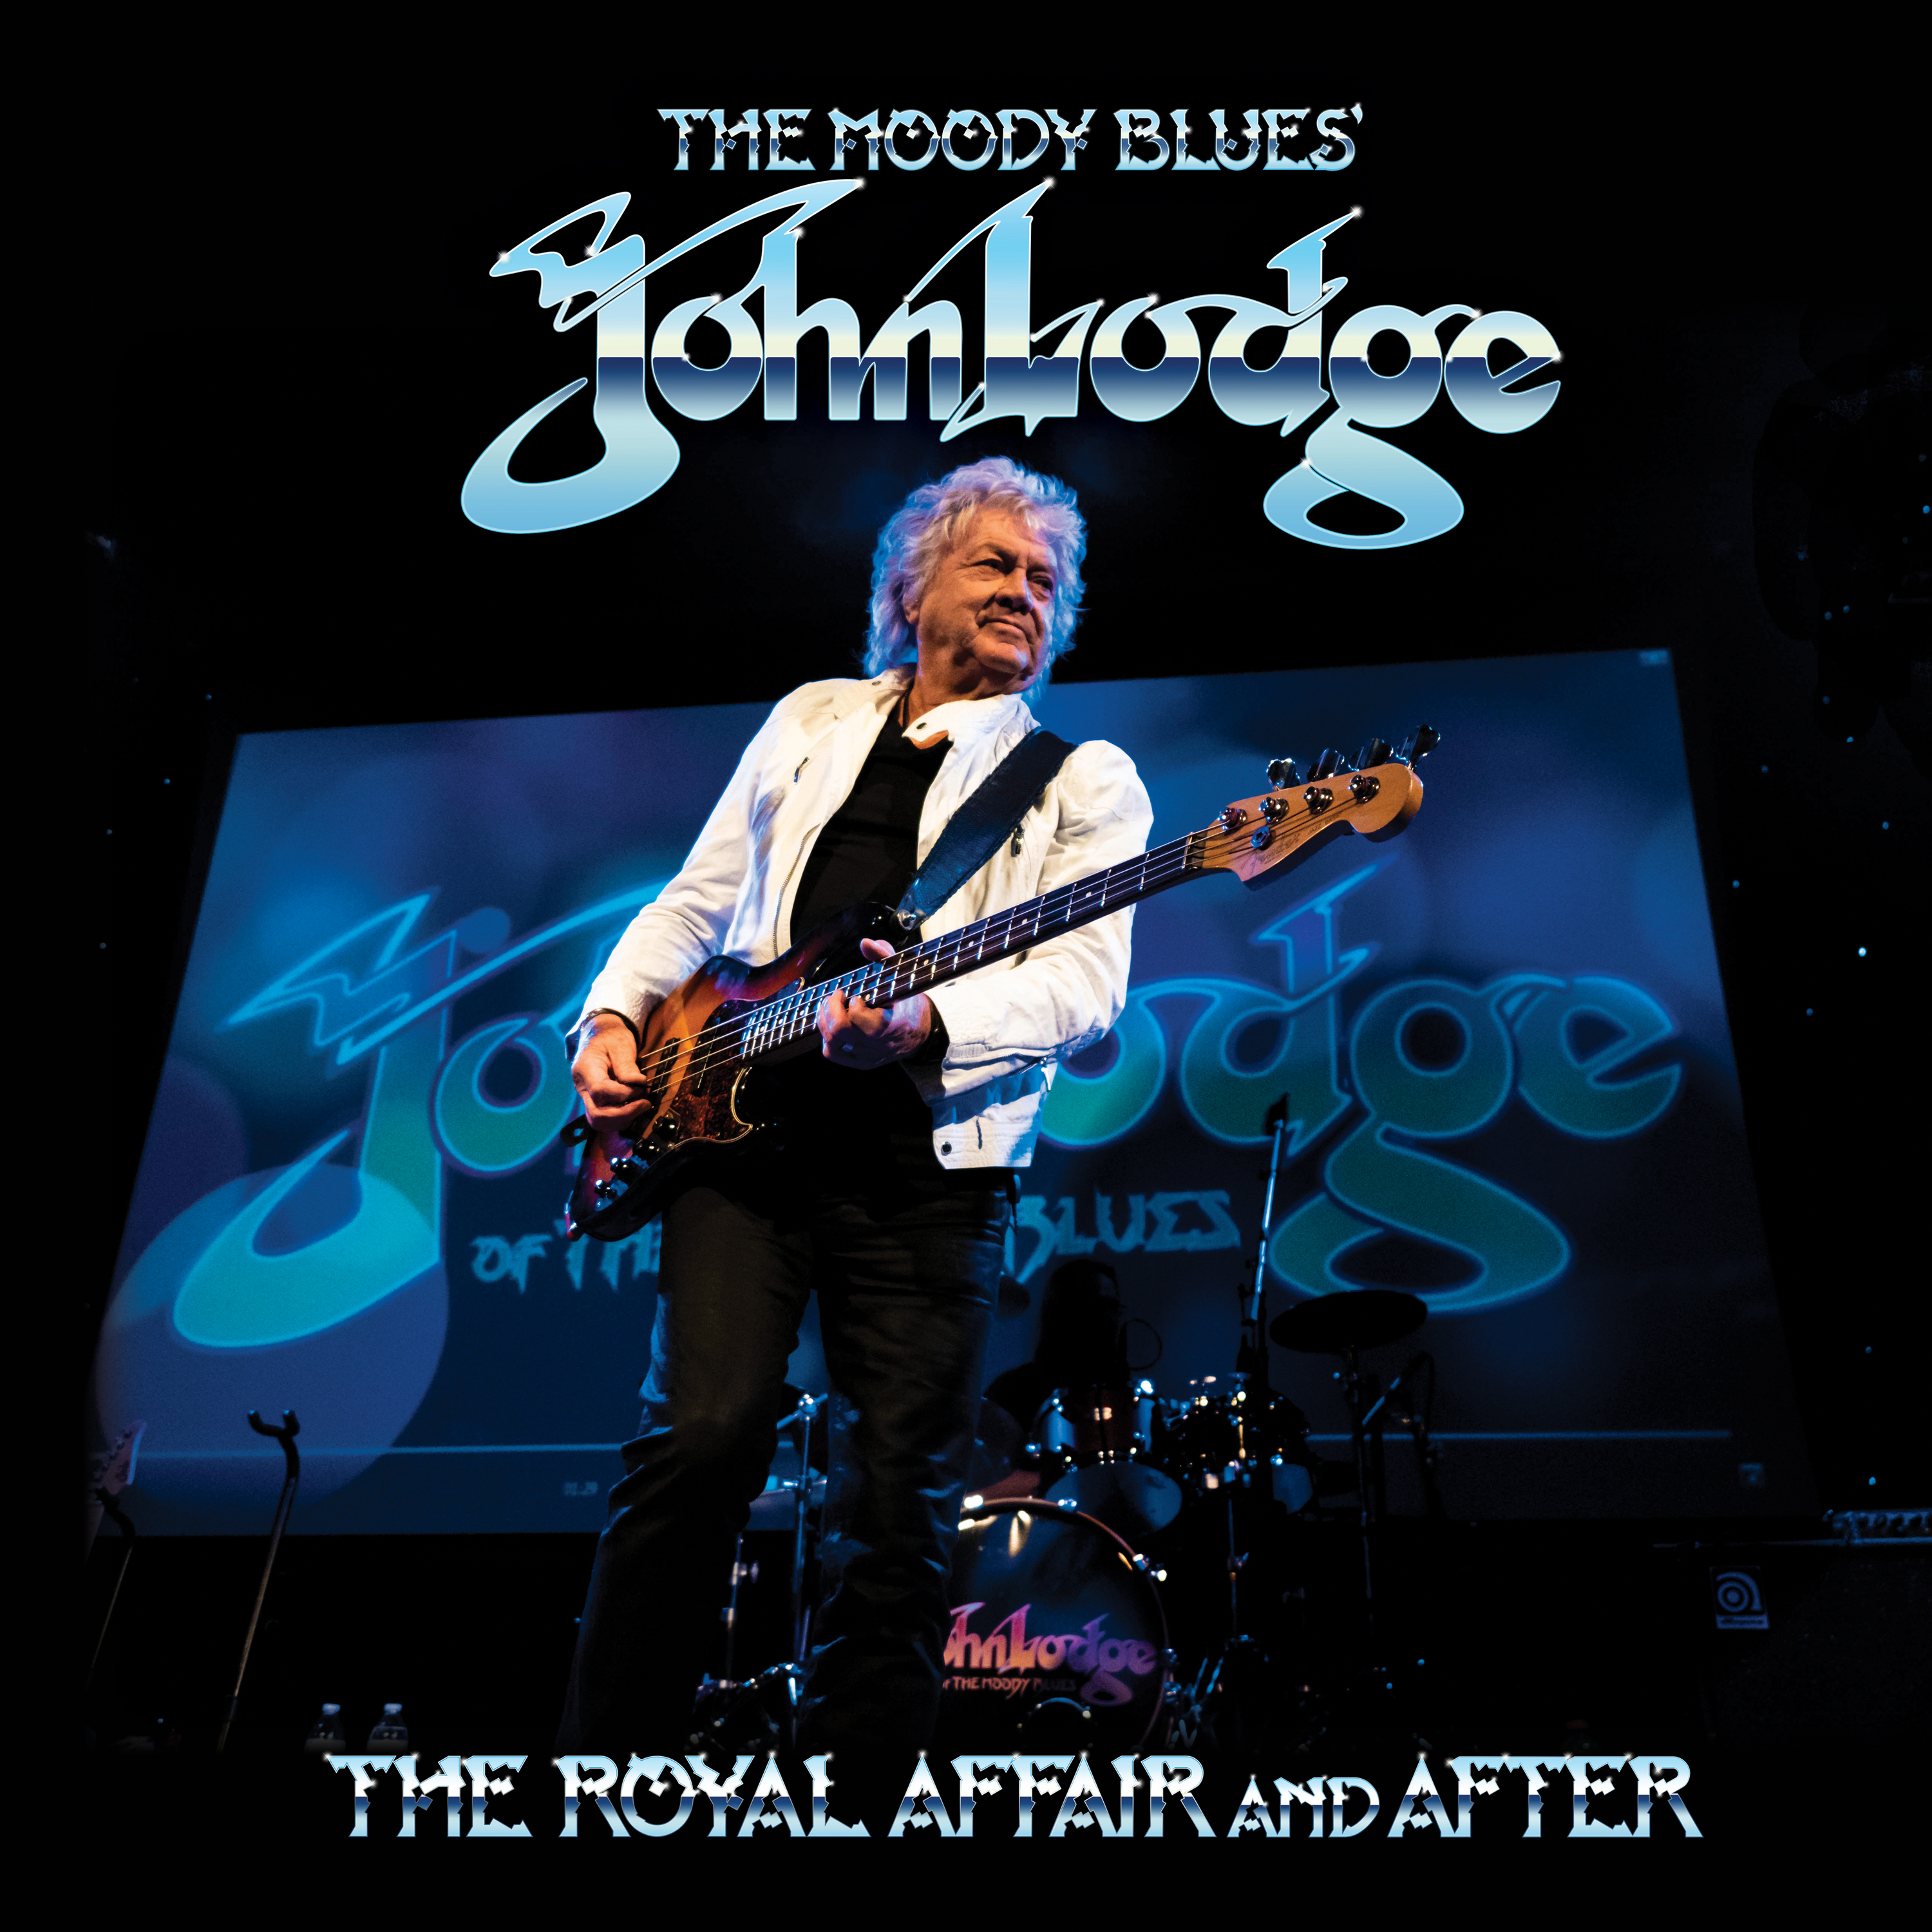 John Lodge Releases ‘The Royal Affair And After’